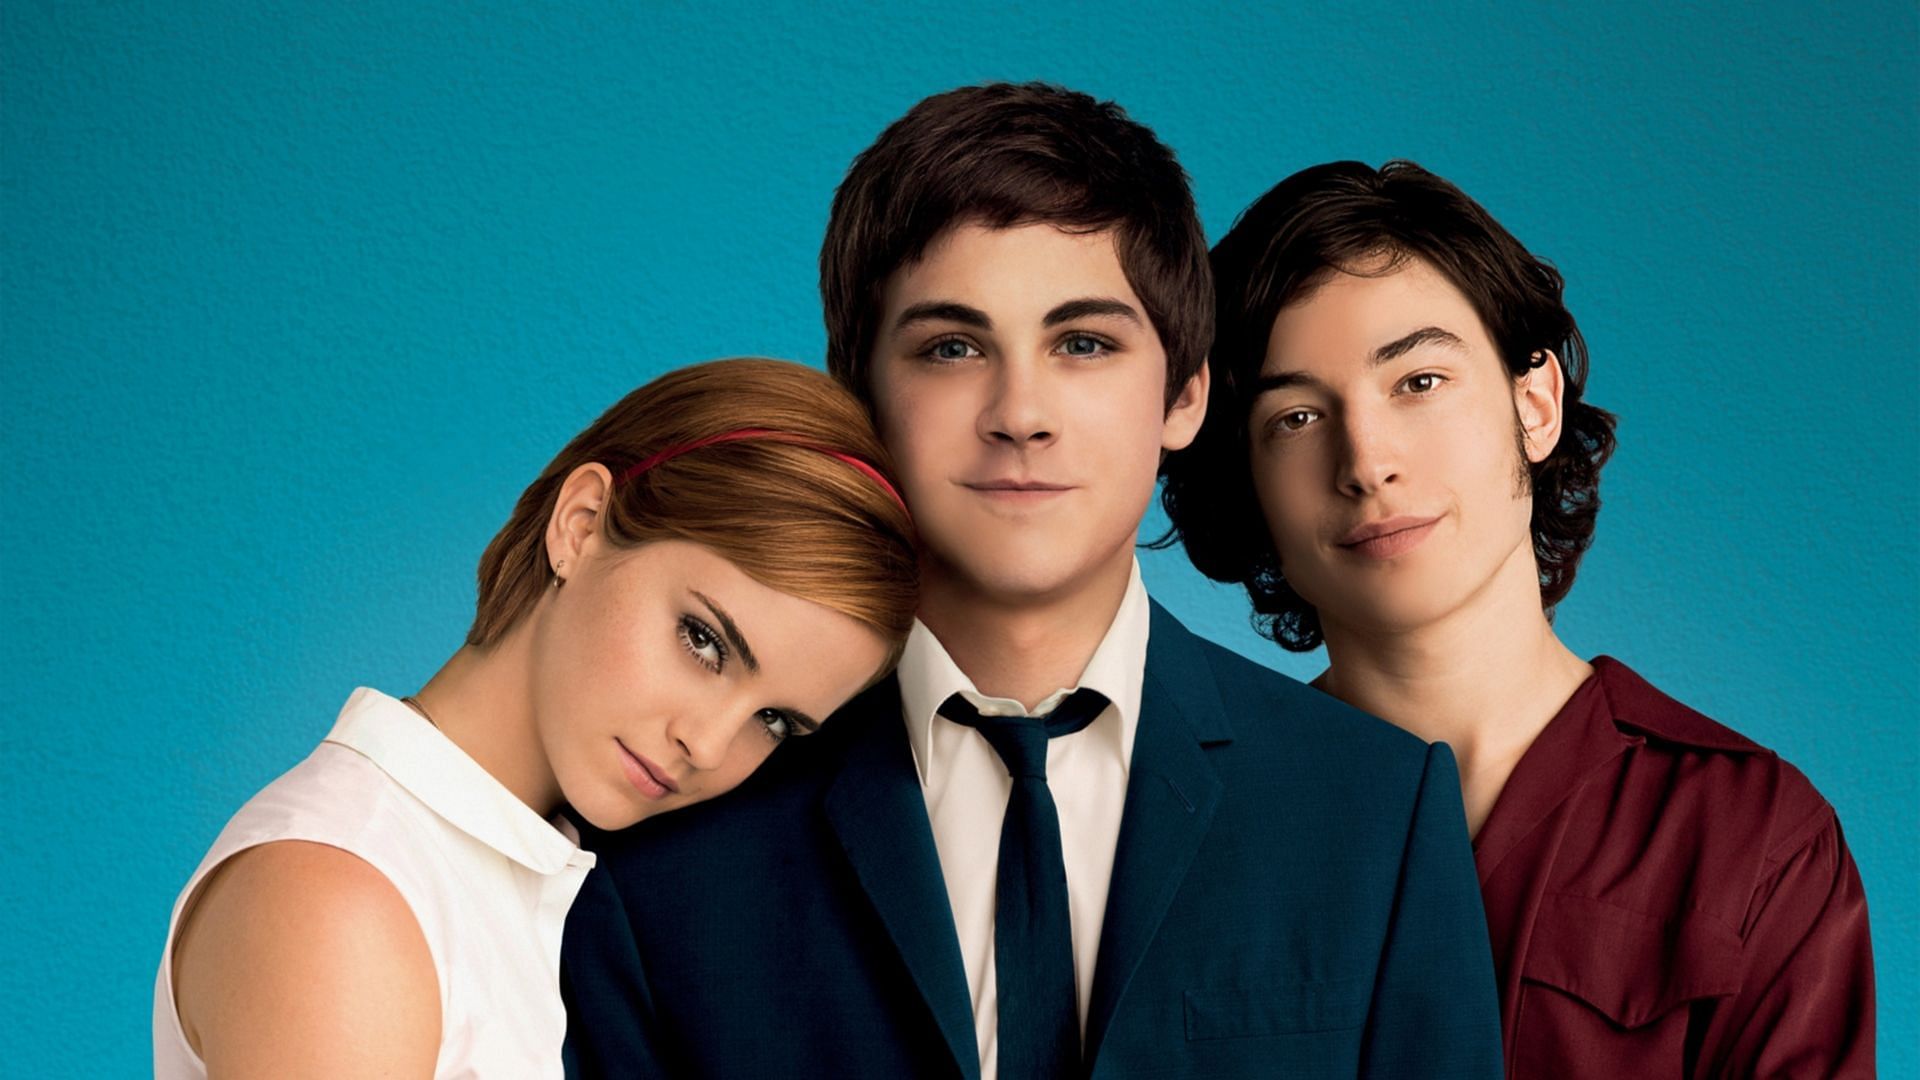 The Perks of Being a Wallflower movie